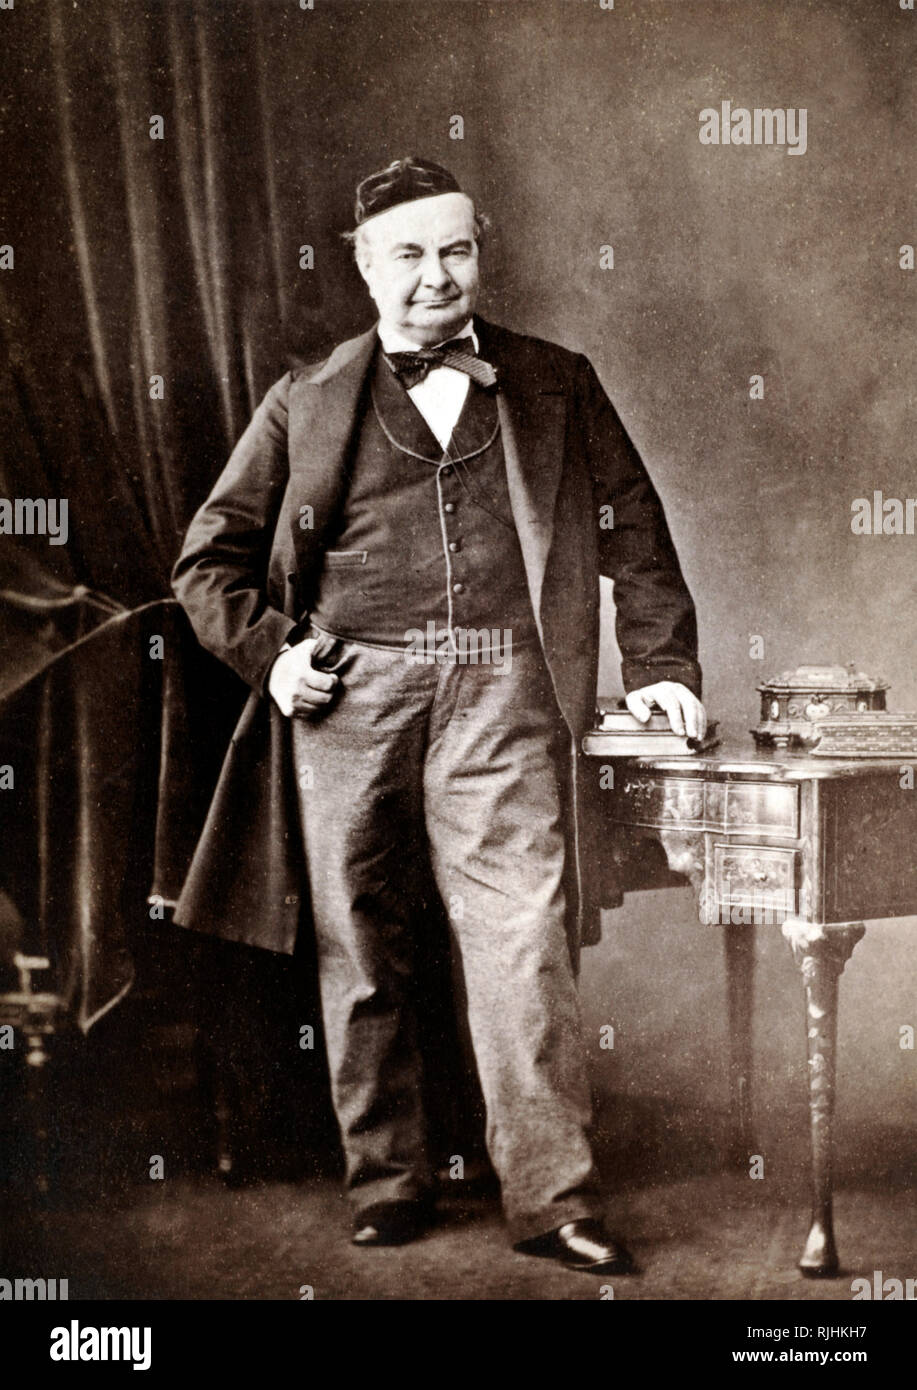 Full-length portrait of Charles Augustin Sainte-Beuve (1804-1869) leading figure in French literary history and literary critic Stock Photo